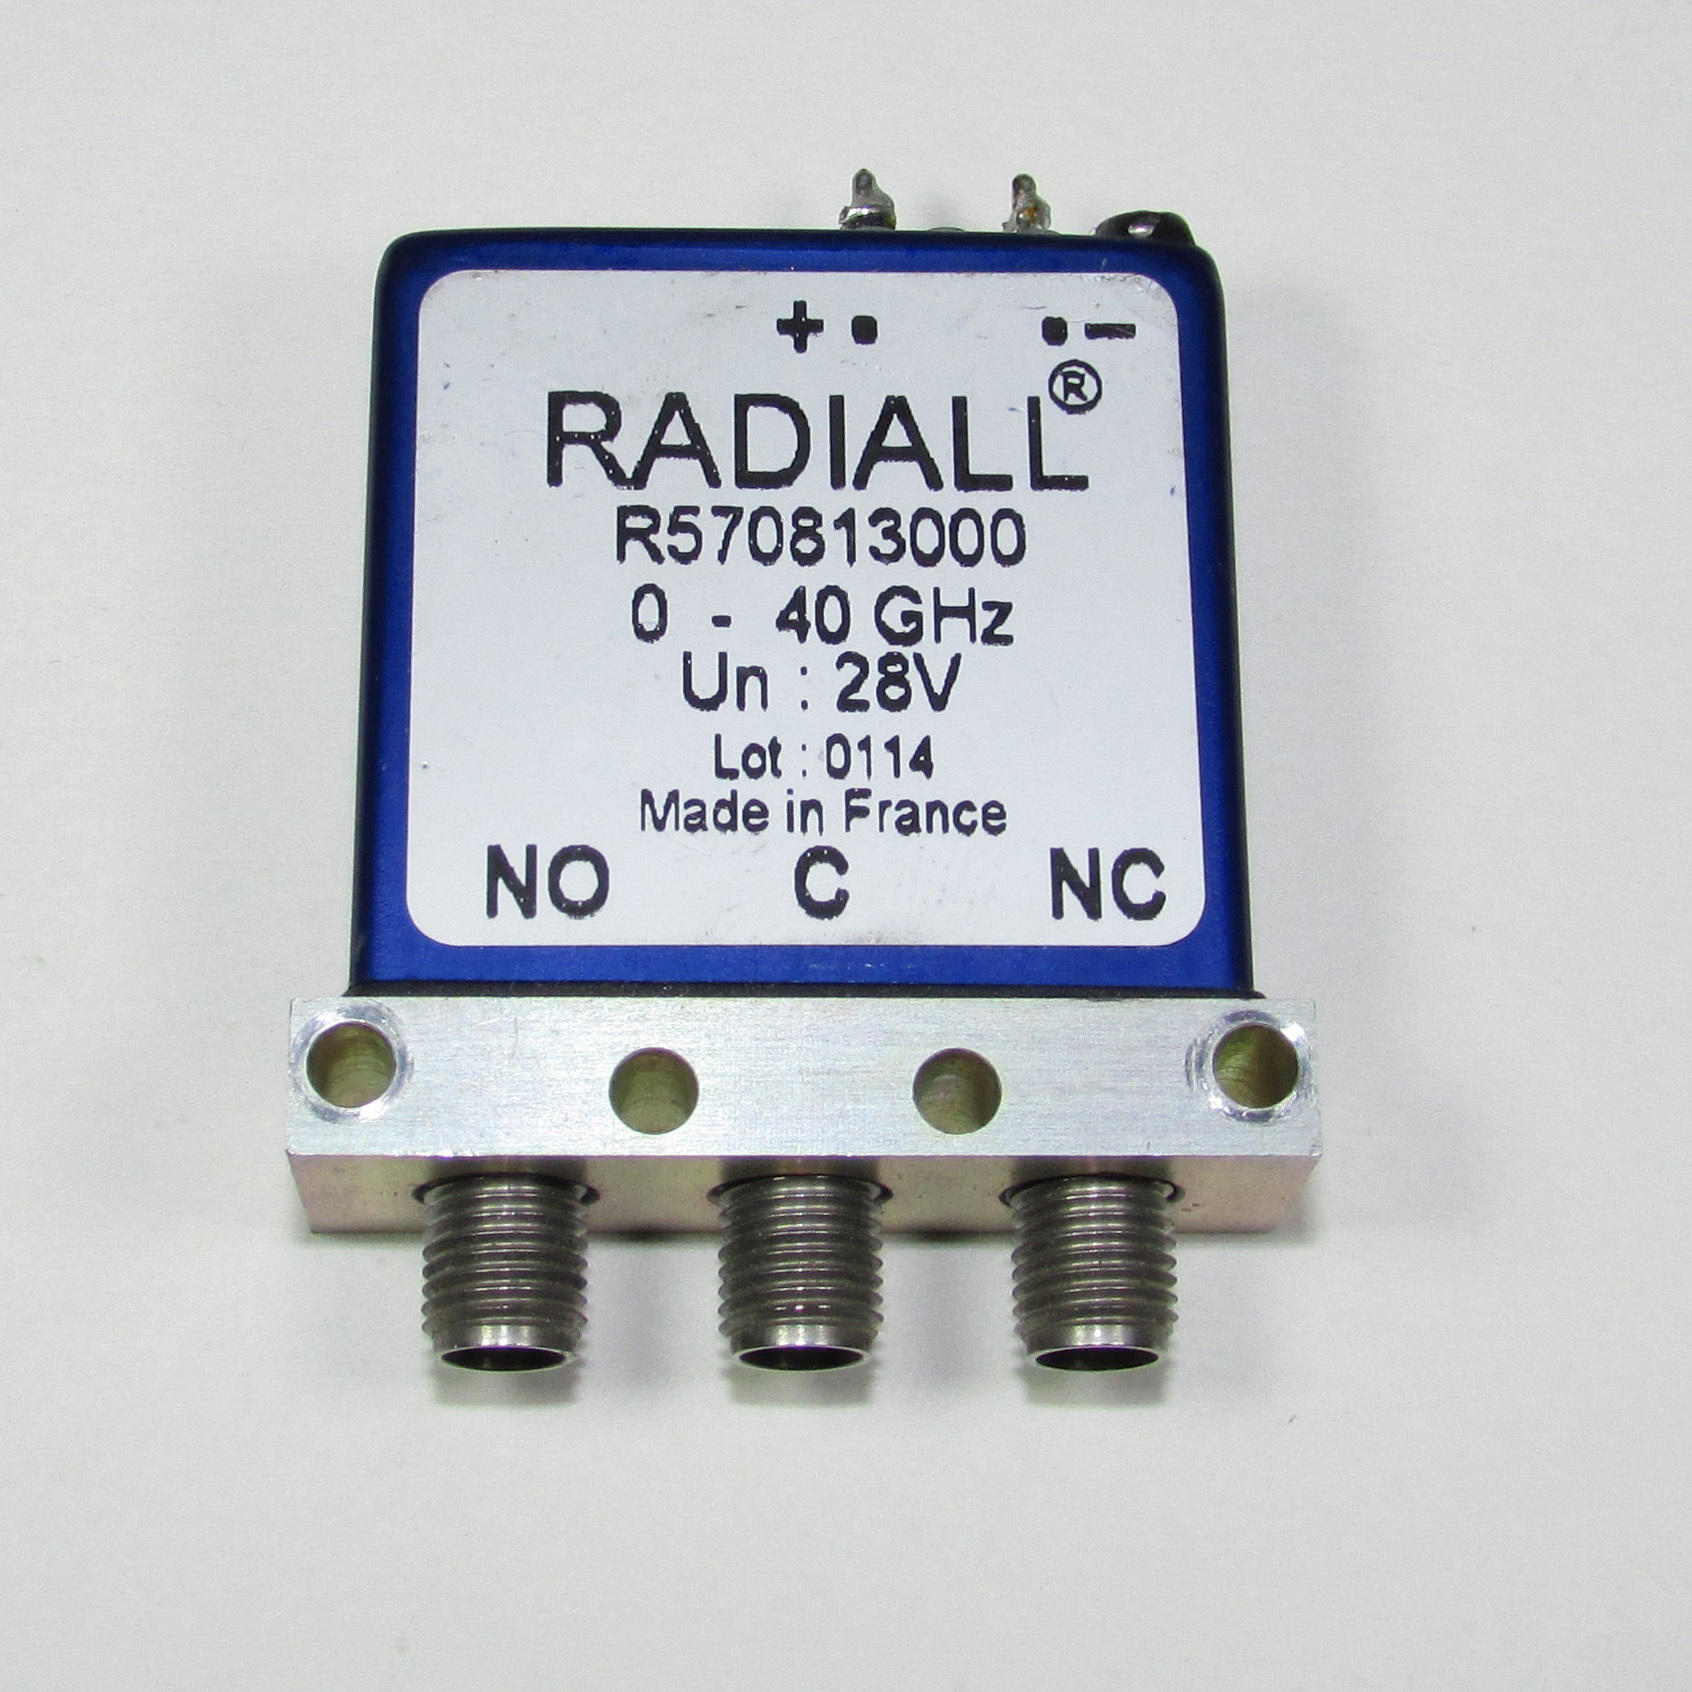 RADIALL R570813000 DC-40GHz 28V SMA RF microwave coaxial single pole double throw switch